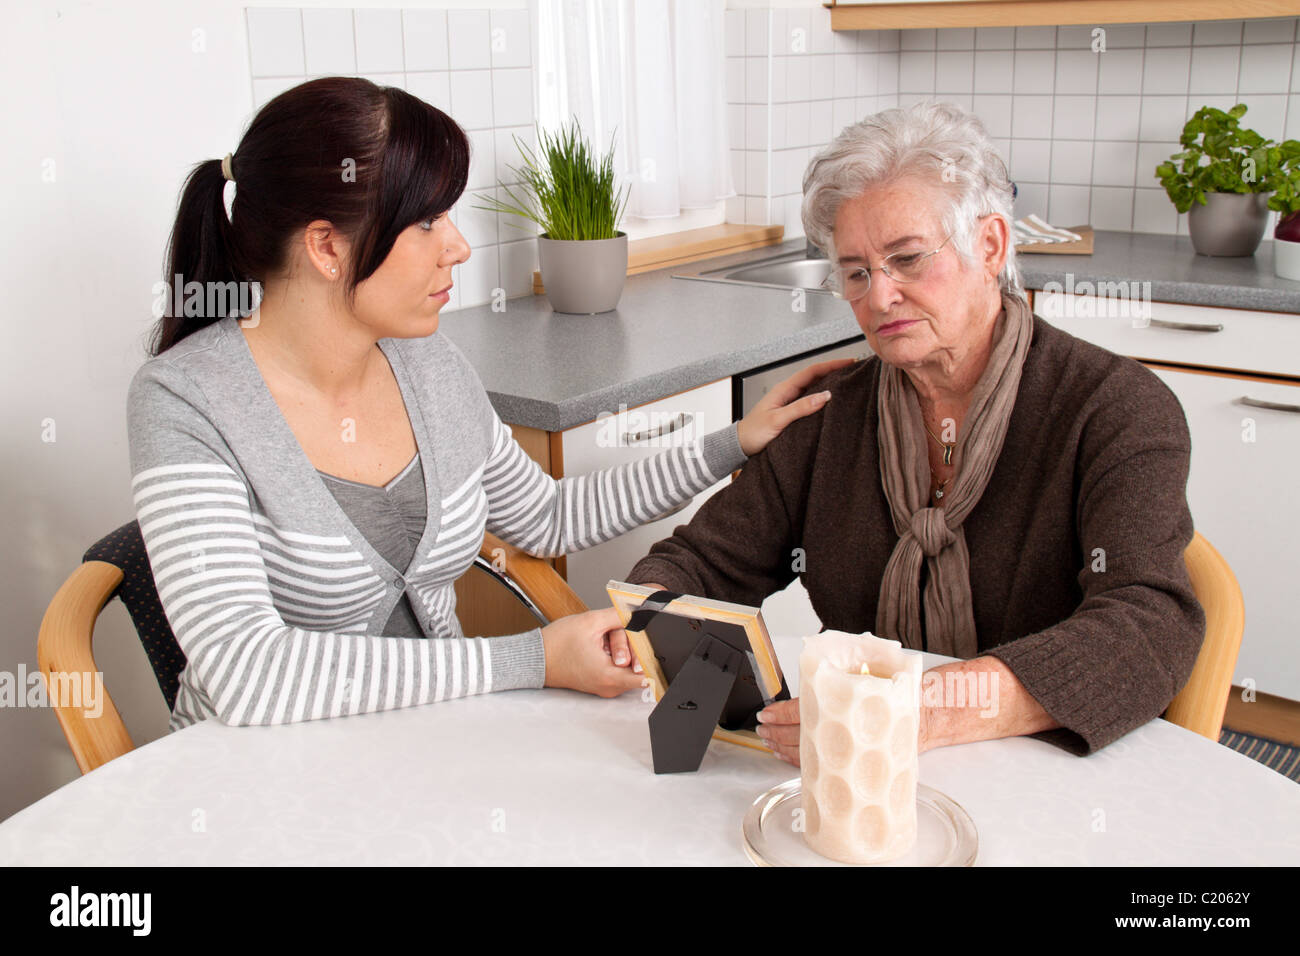 Woman comforting a widow after death. Bereavement support. Stock Photo